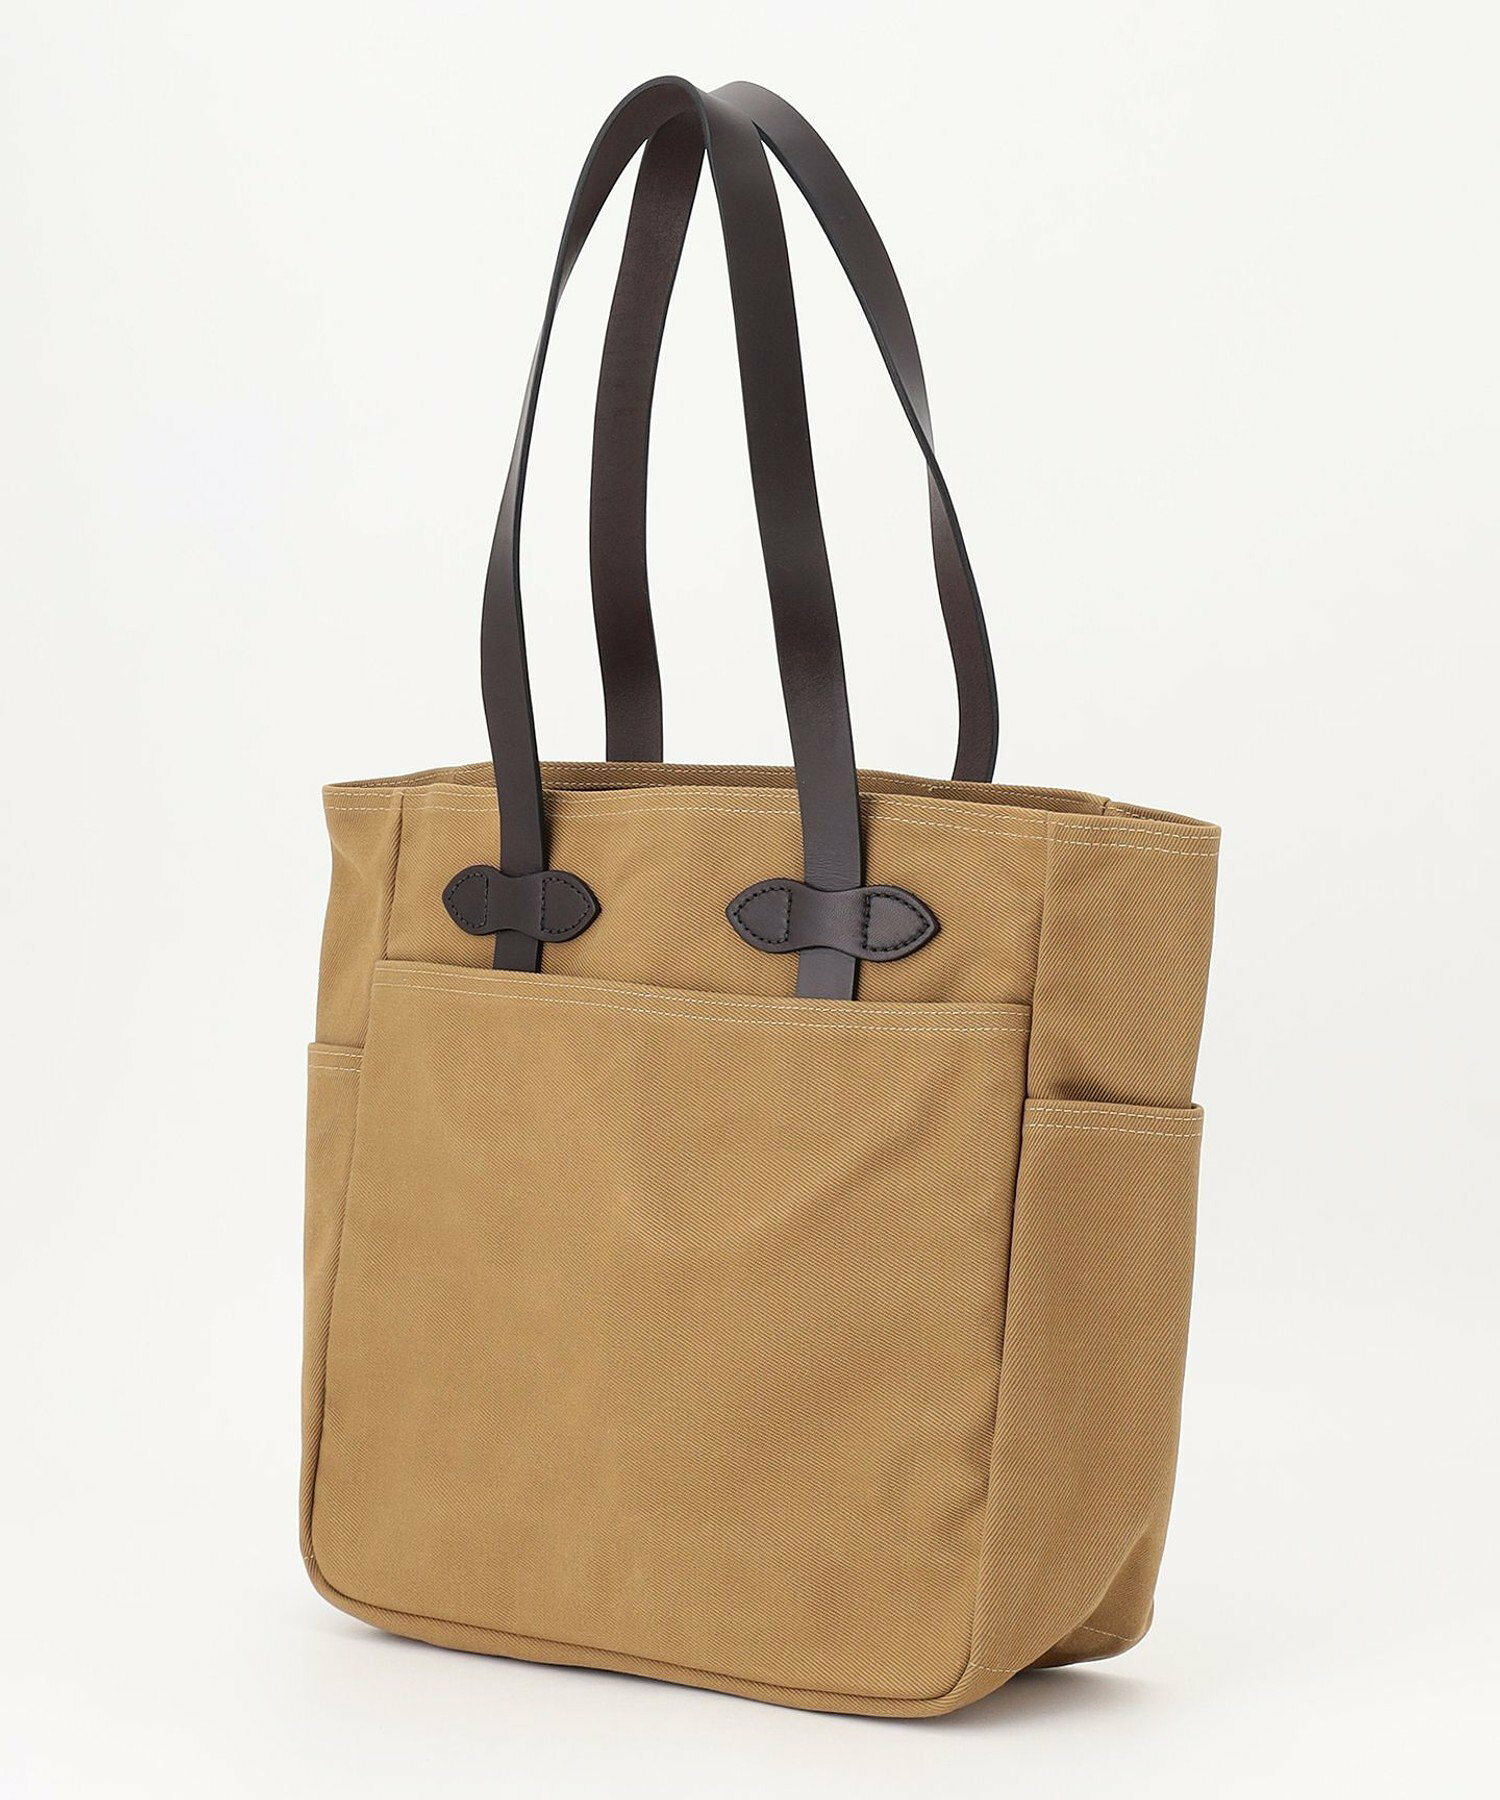 【FILSON】TOTE BAG WITHOUT ZIPPER トートバッグ